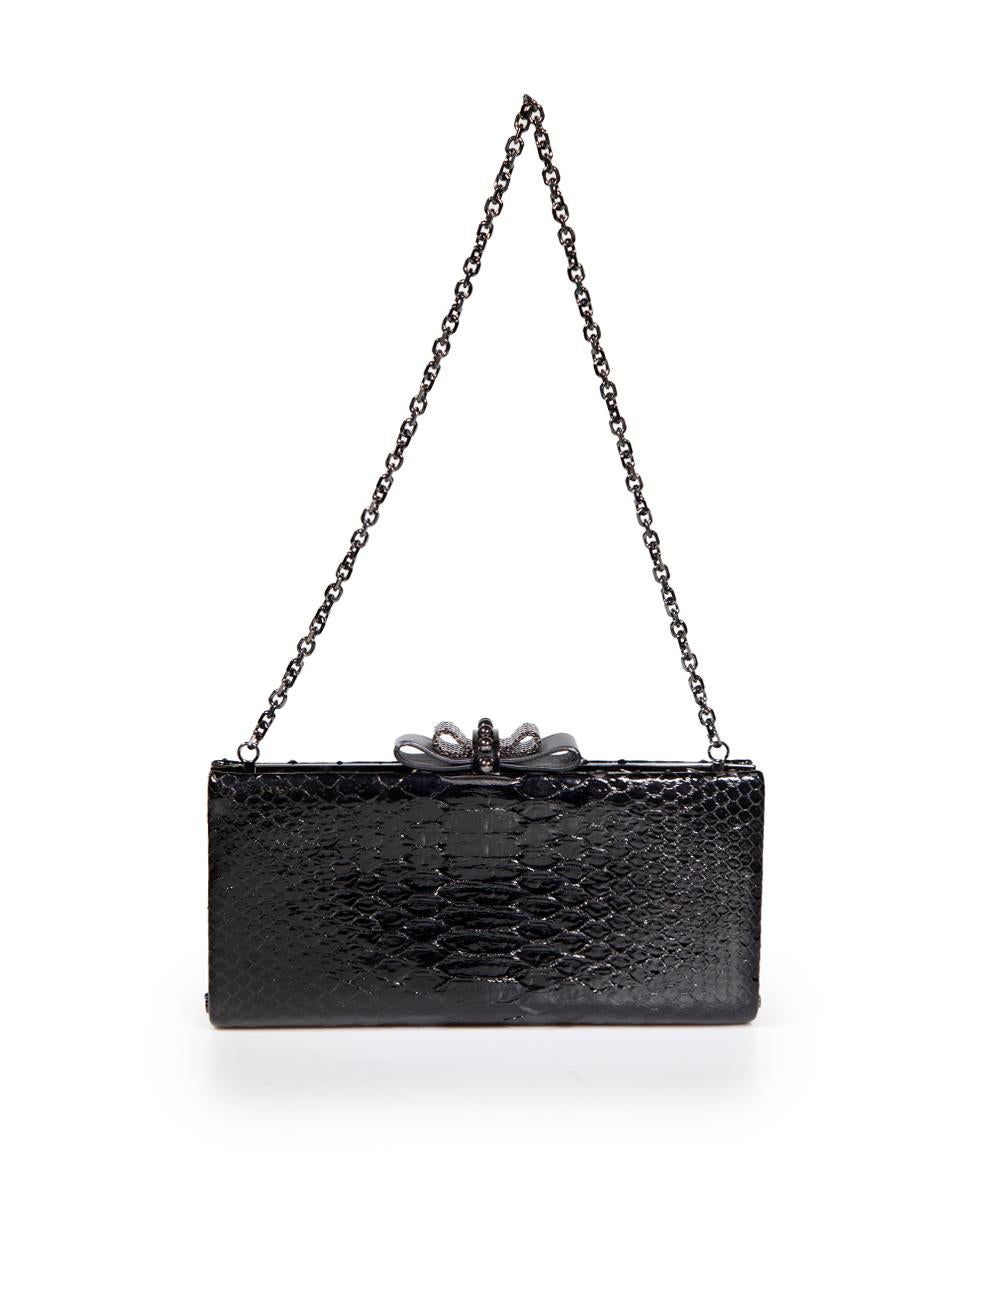 Christian Louboutin Black Python Sweet Charity Clutch In Excellent Condition For Sale In London, GB